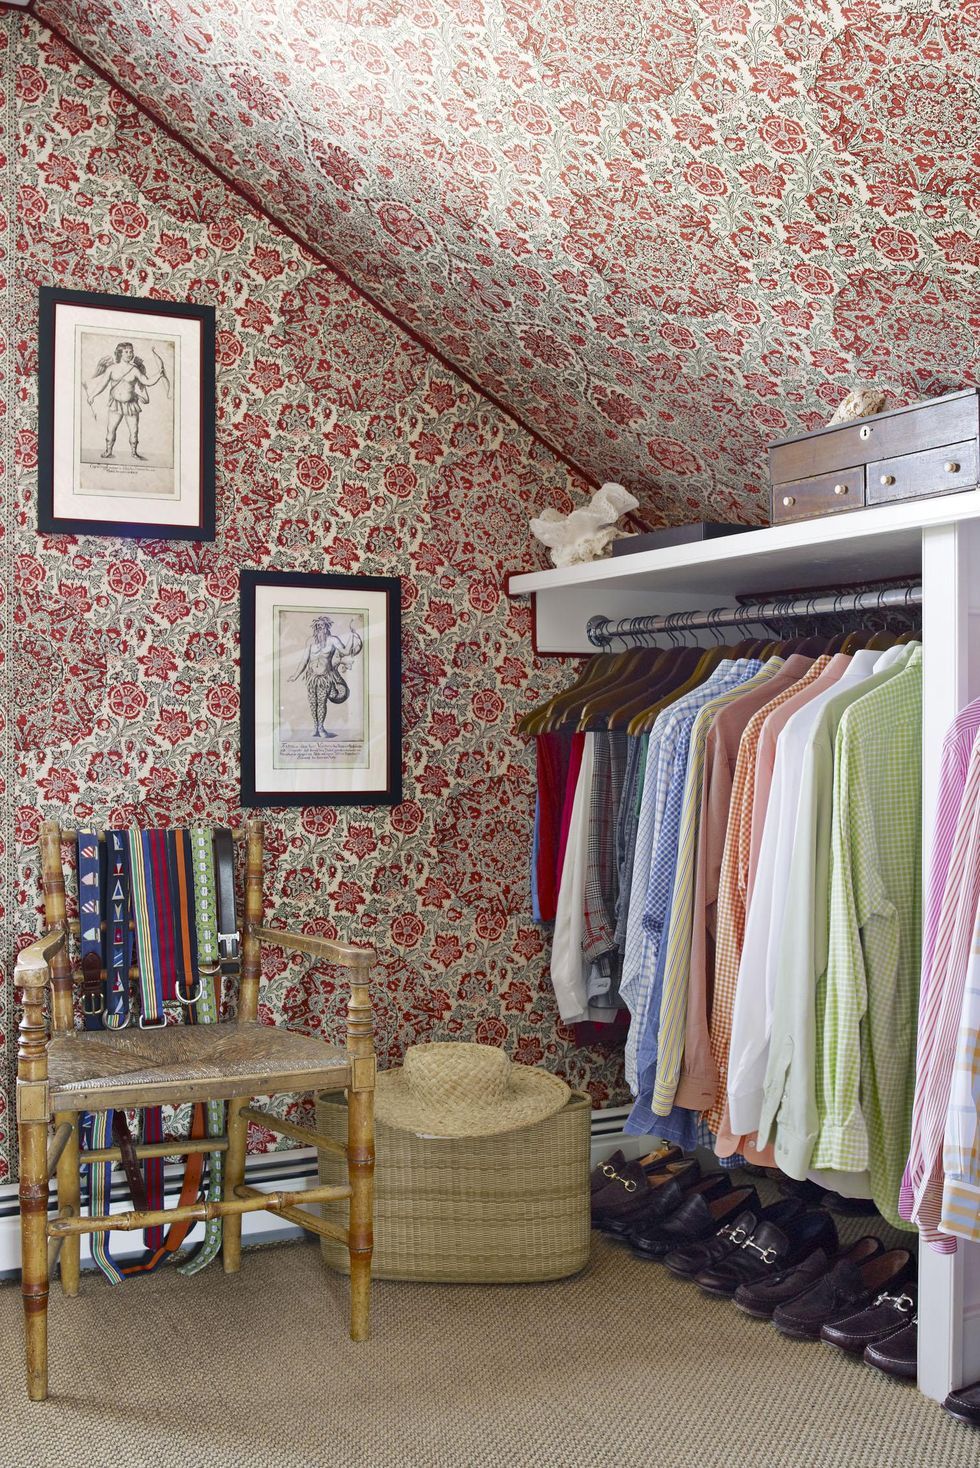 Two People, One Tiny Closet - A Small Space Storage Agony with 5